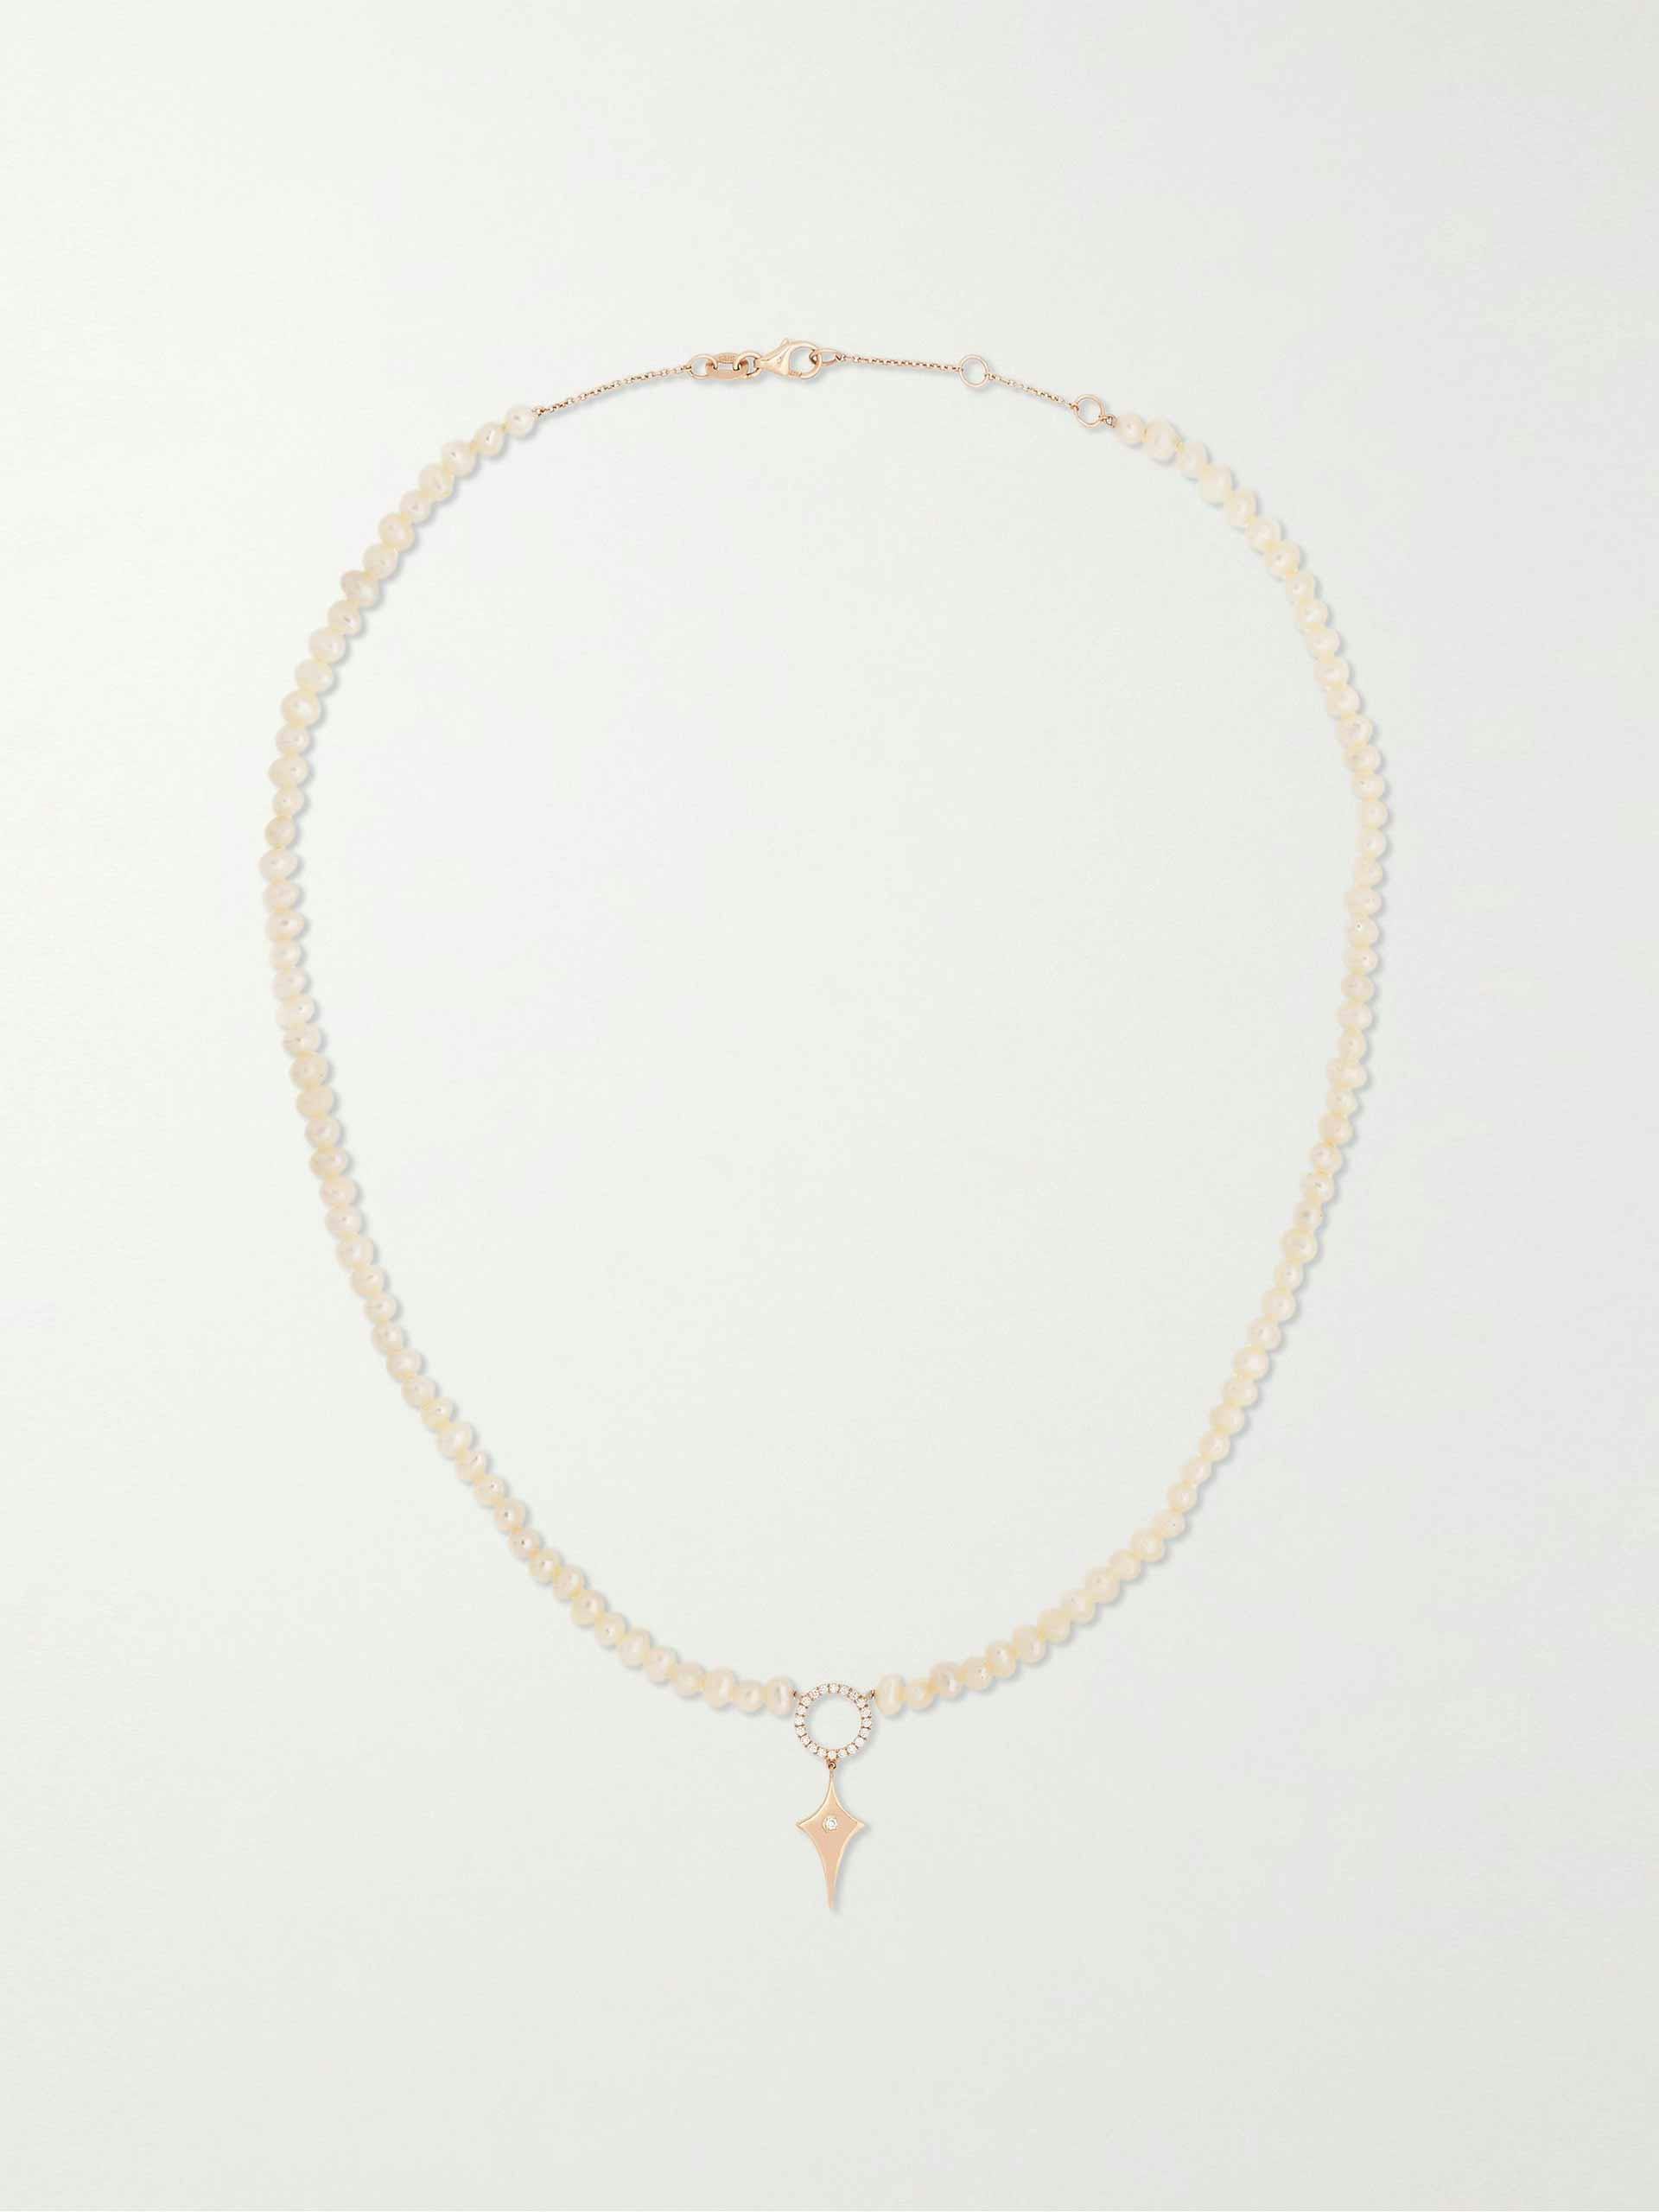 Rose gold, pearl and diamond necklace